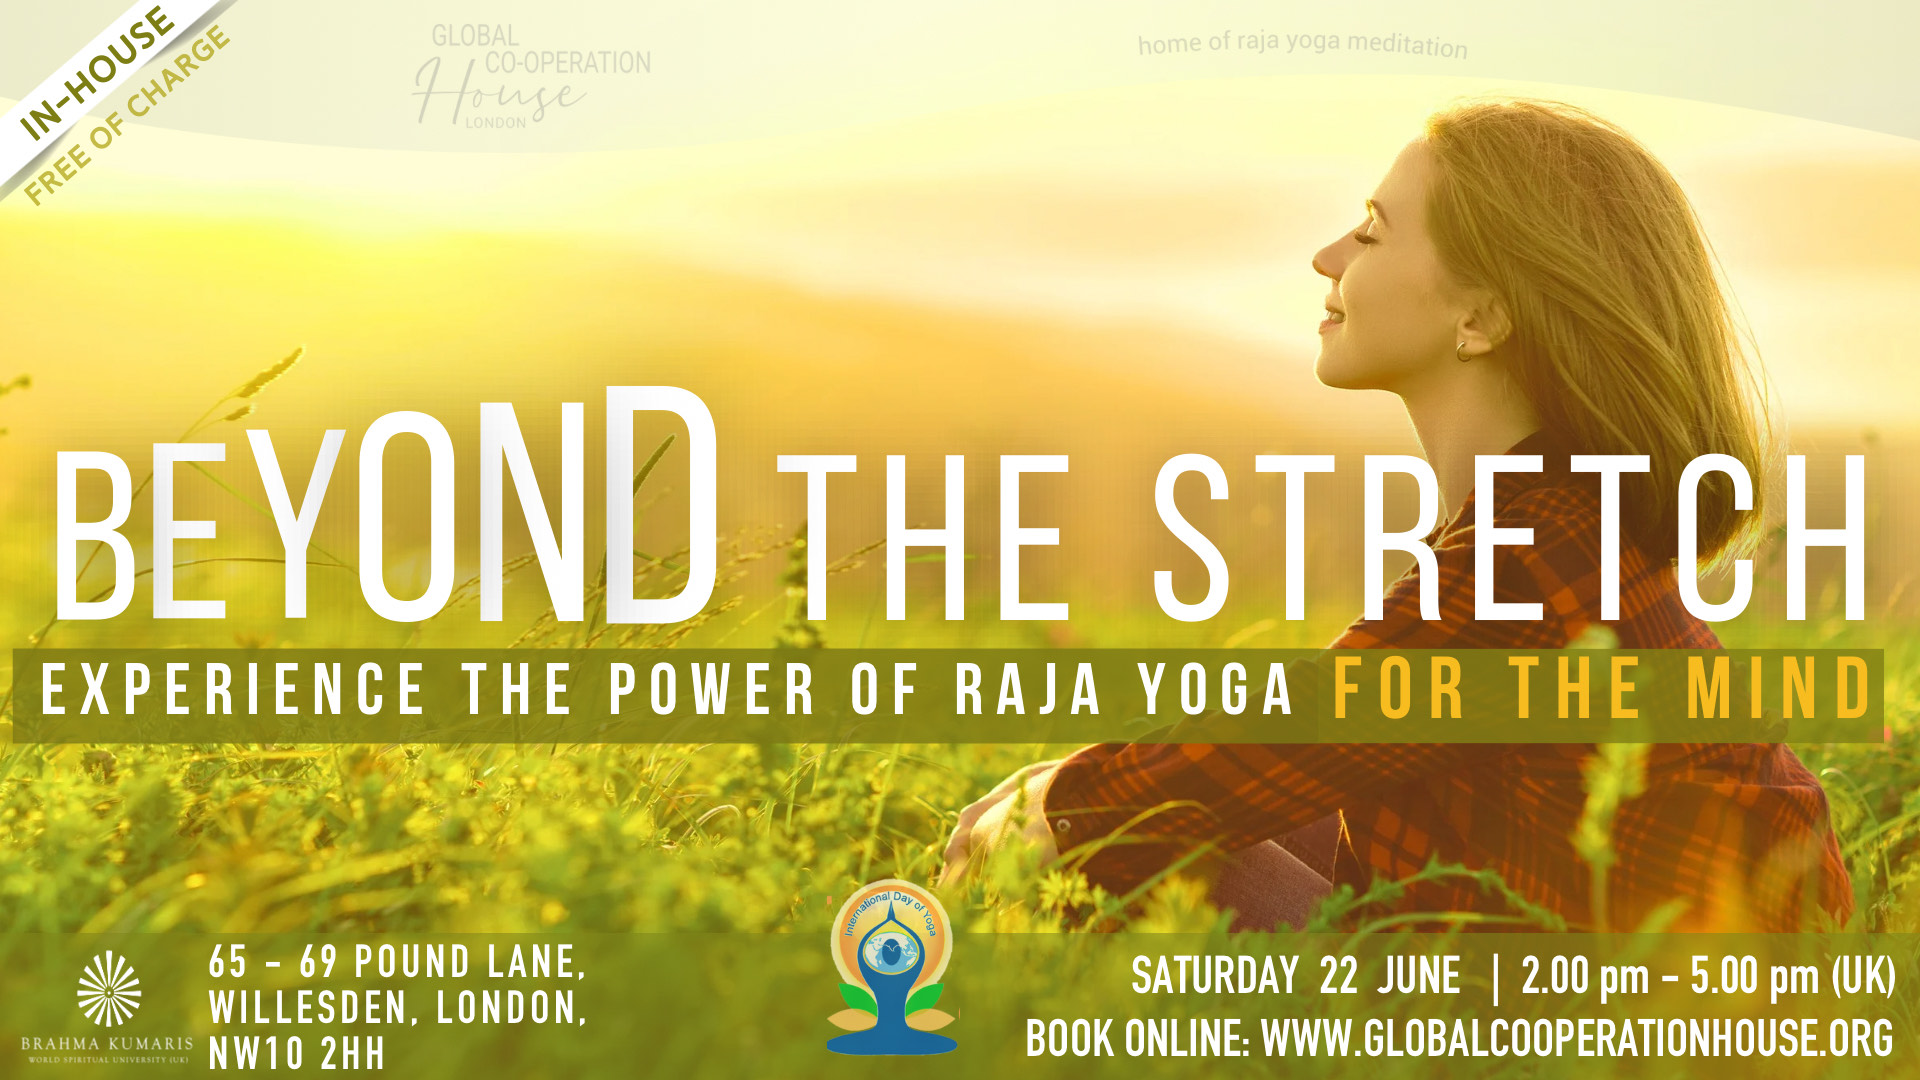 Beyond The Stretch: Experience the Power of Raja Yoga for the Mind